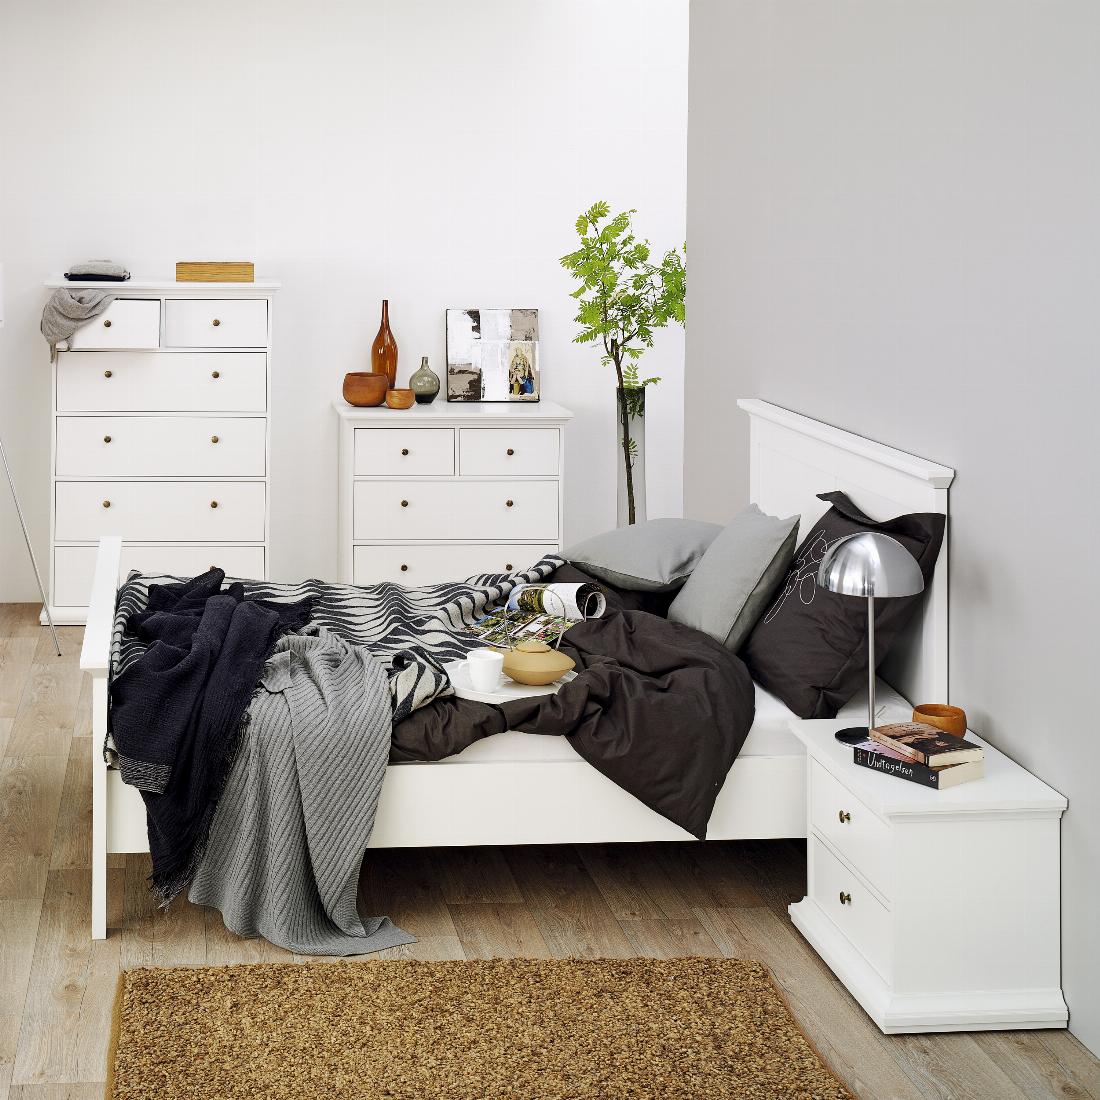 Paris Chest of 4 Drawers in White